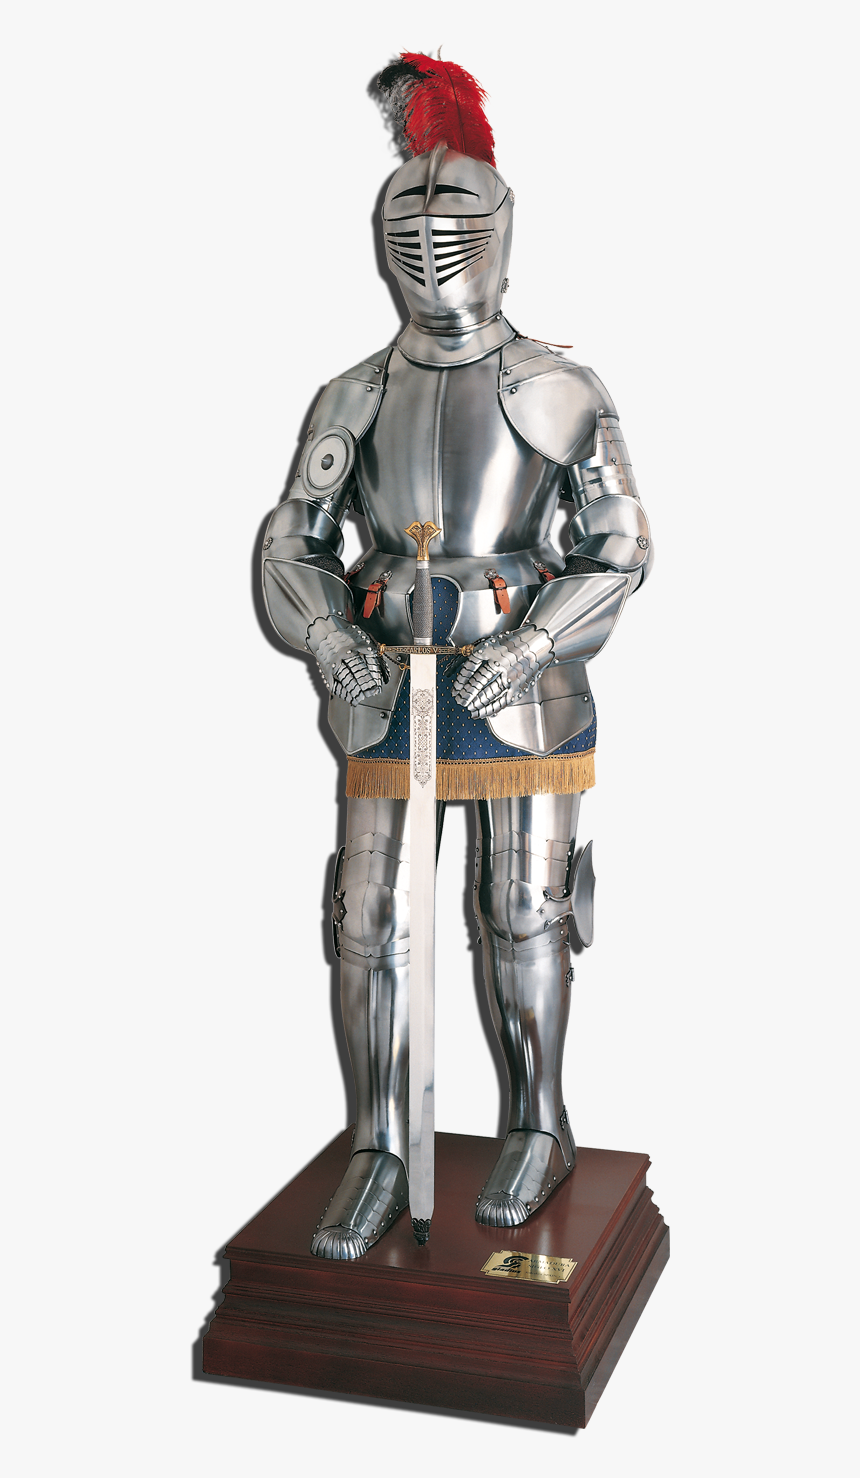 Free Download Of Armour Png Image Without Background - Armor Knight Full Body, Transparent Png, Free Download